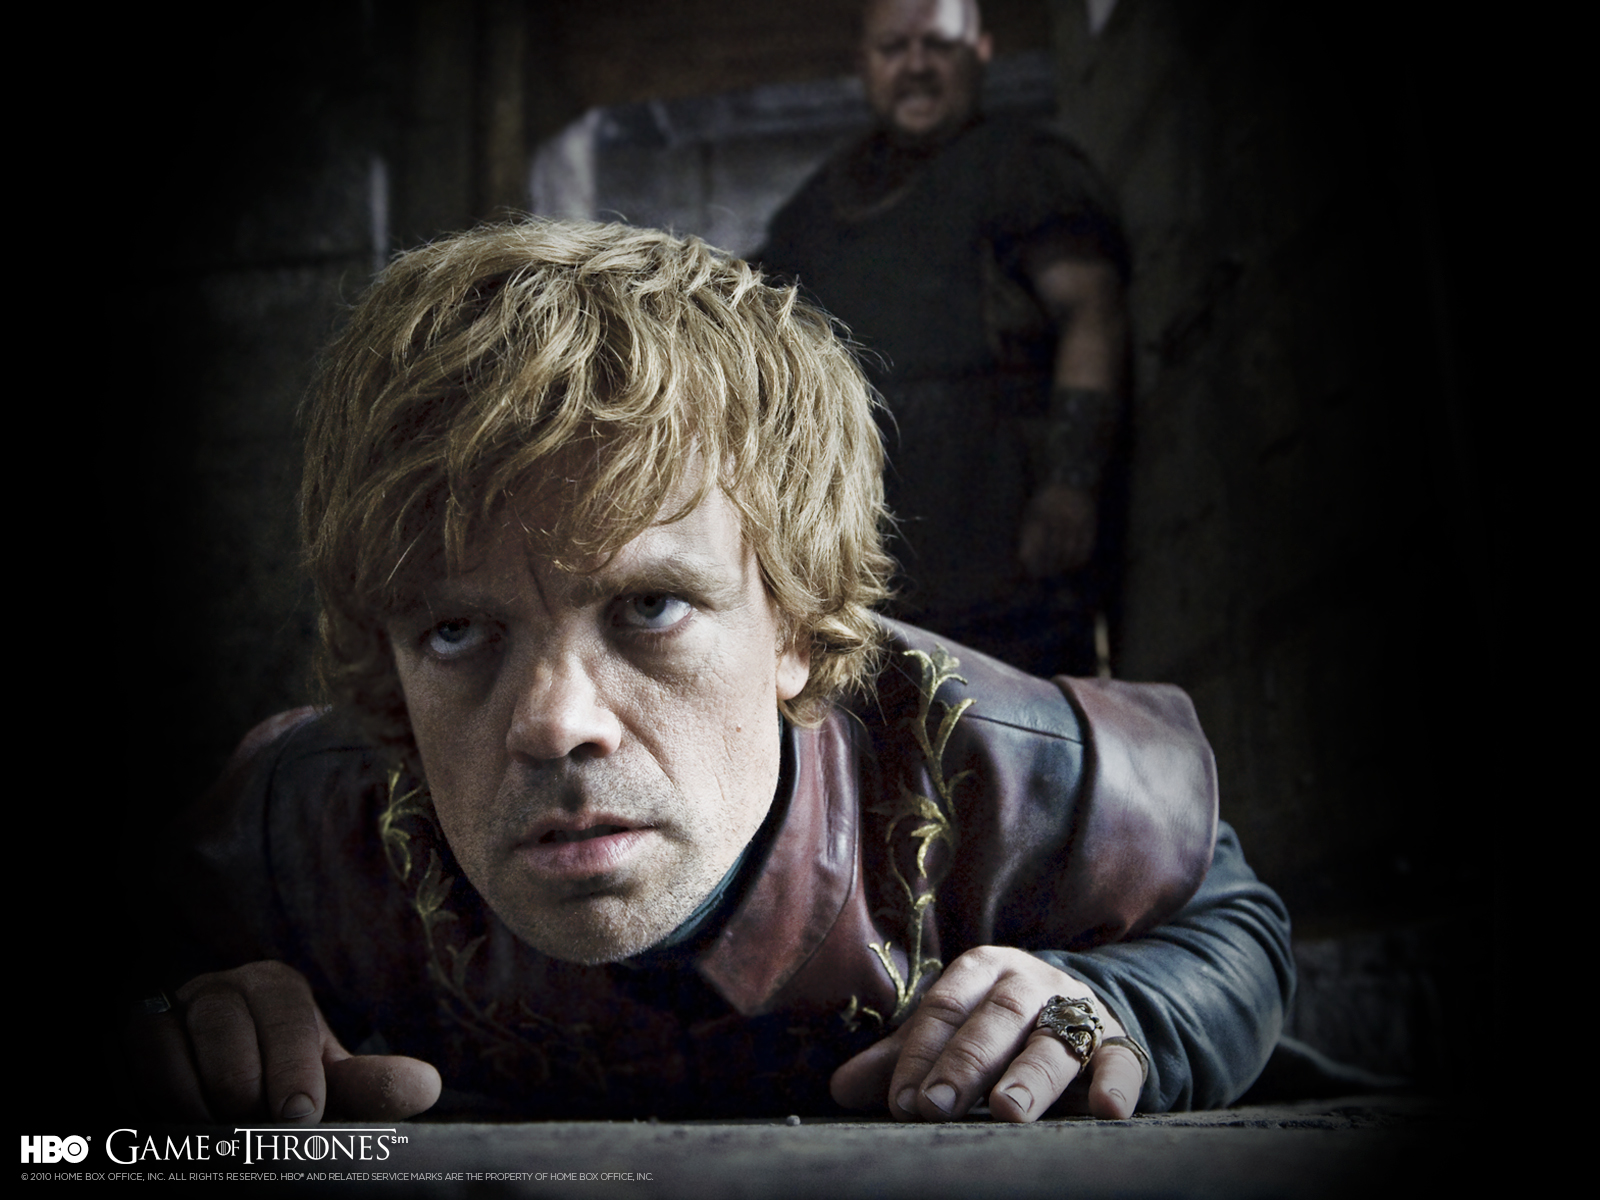 Tyrion Lannister from Game of Thrones: Peter Dinklage in a commanding pose.